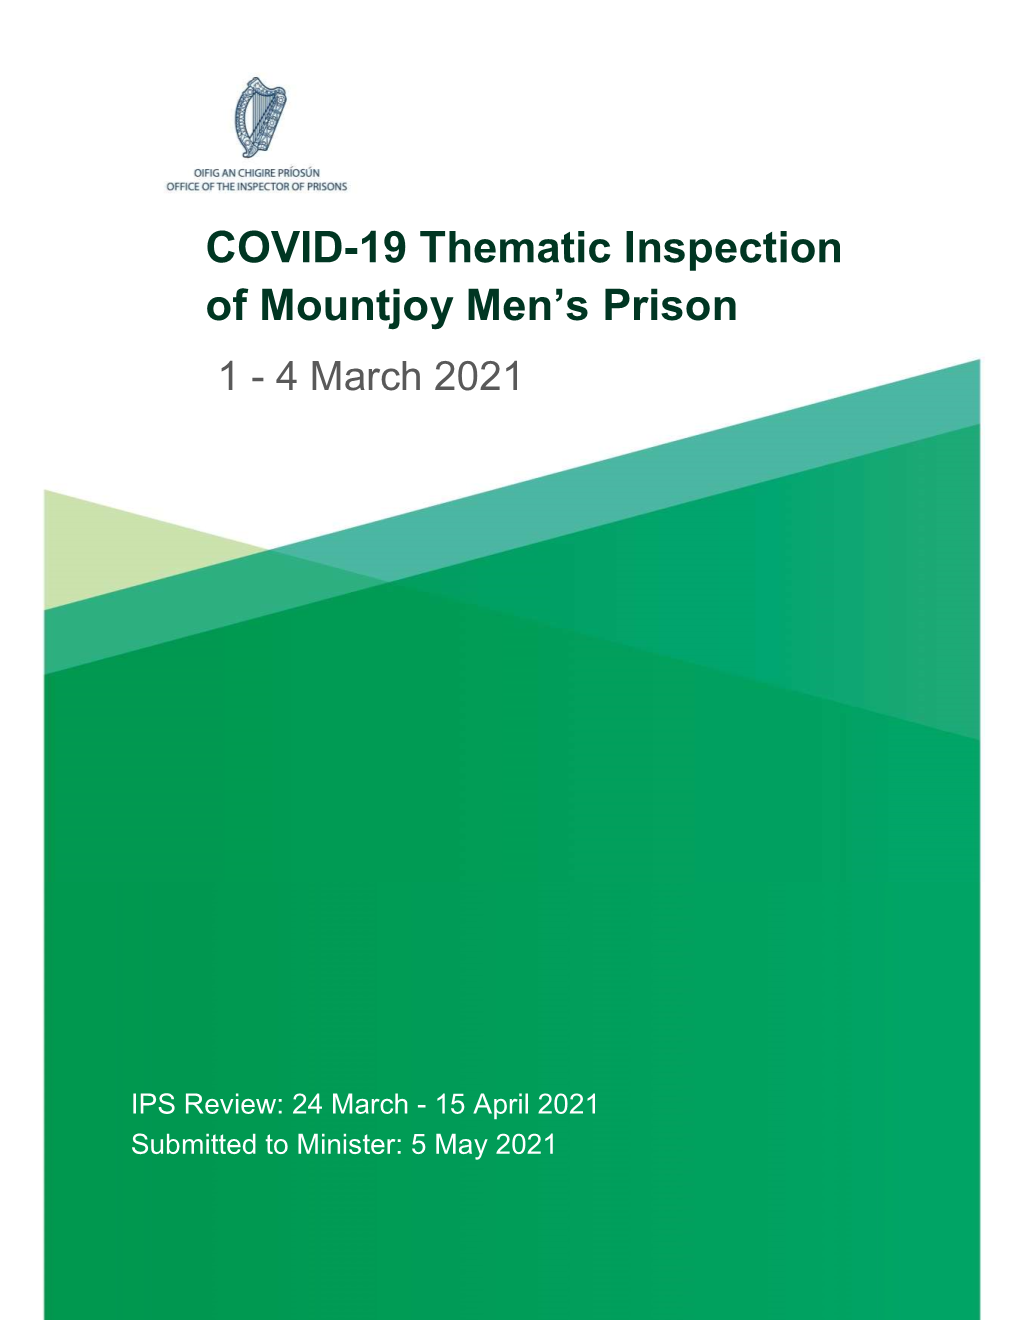 COVID-19 Thematic Inspection of Mountjoy Men's Prison